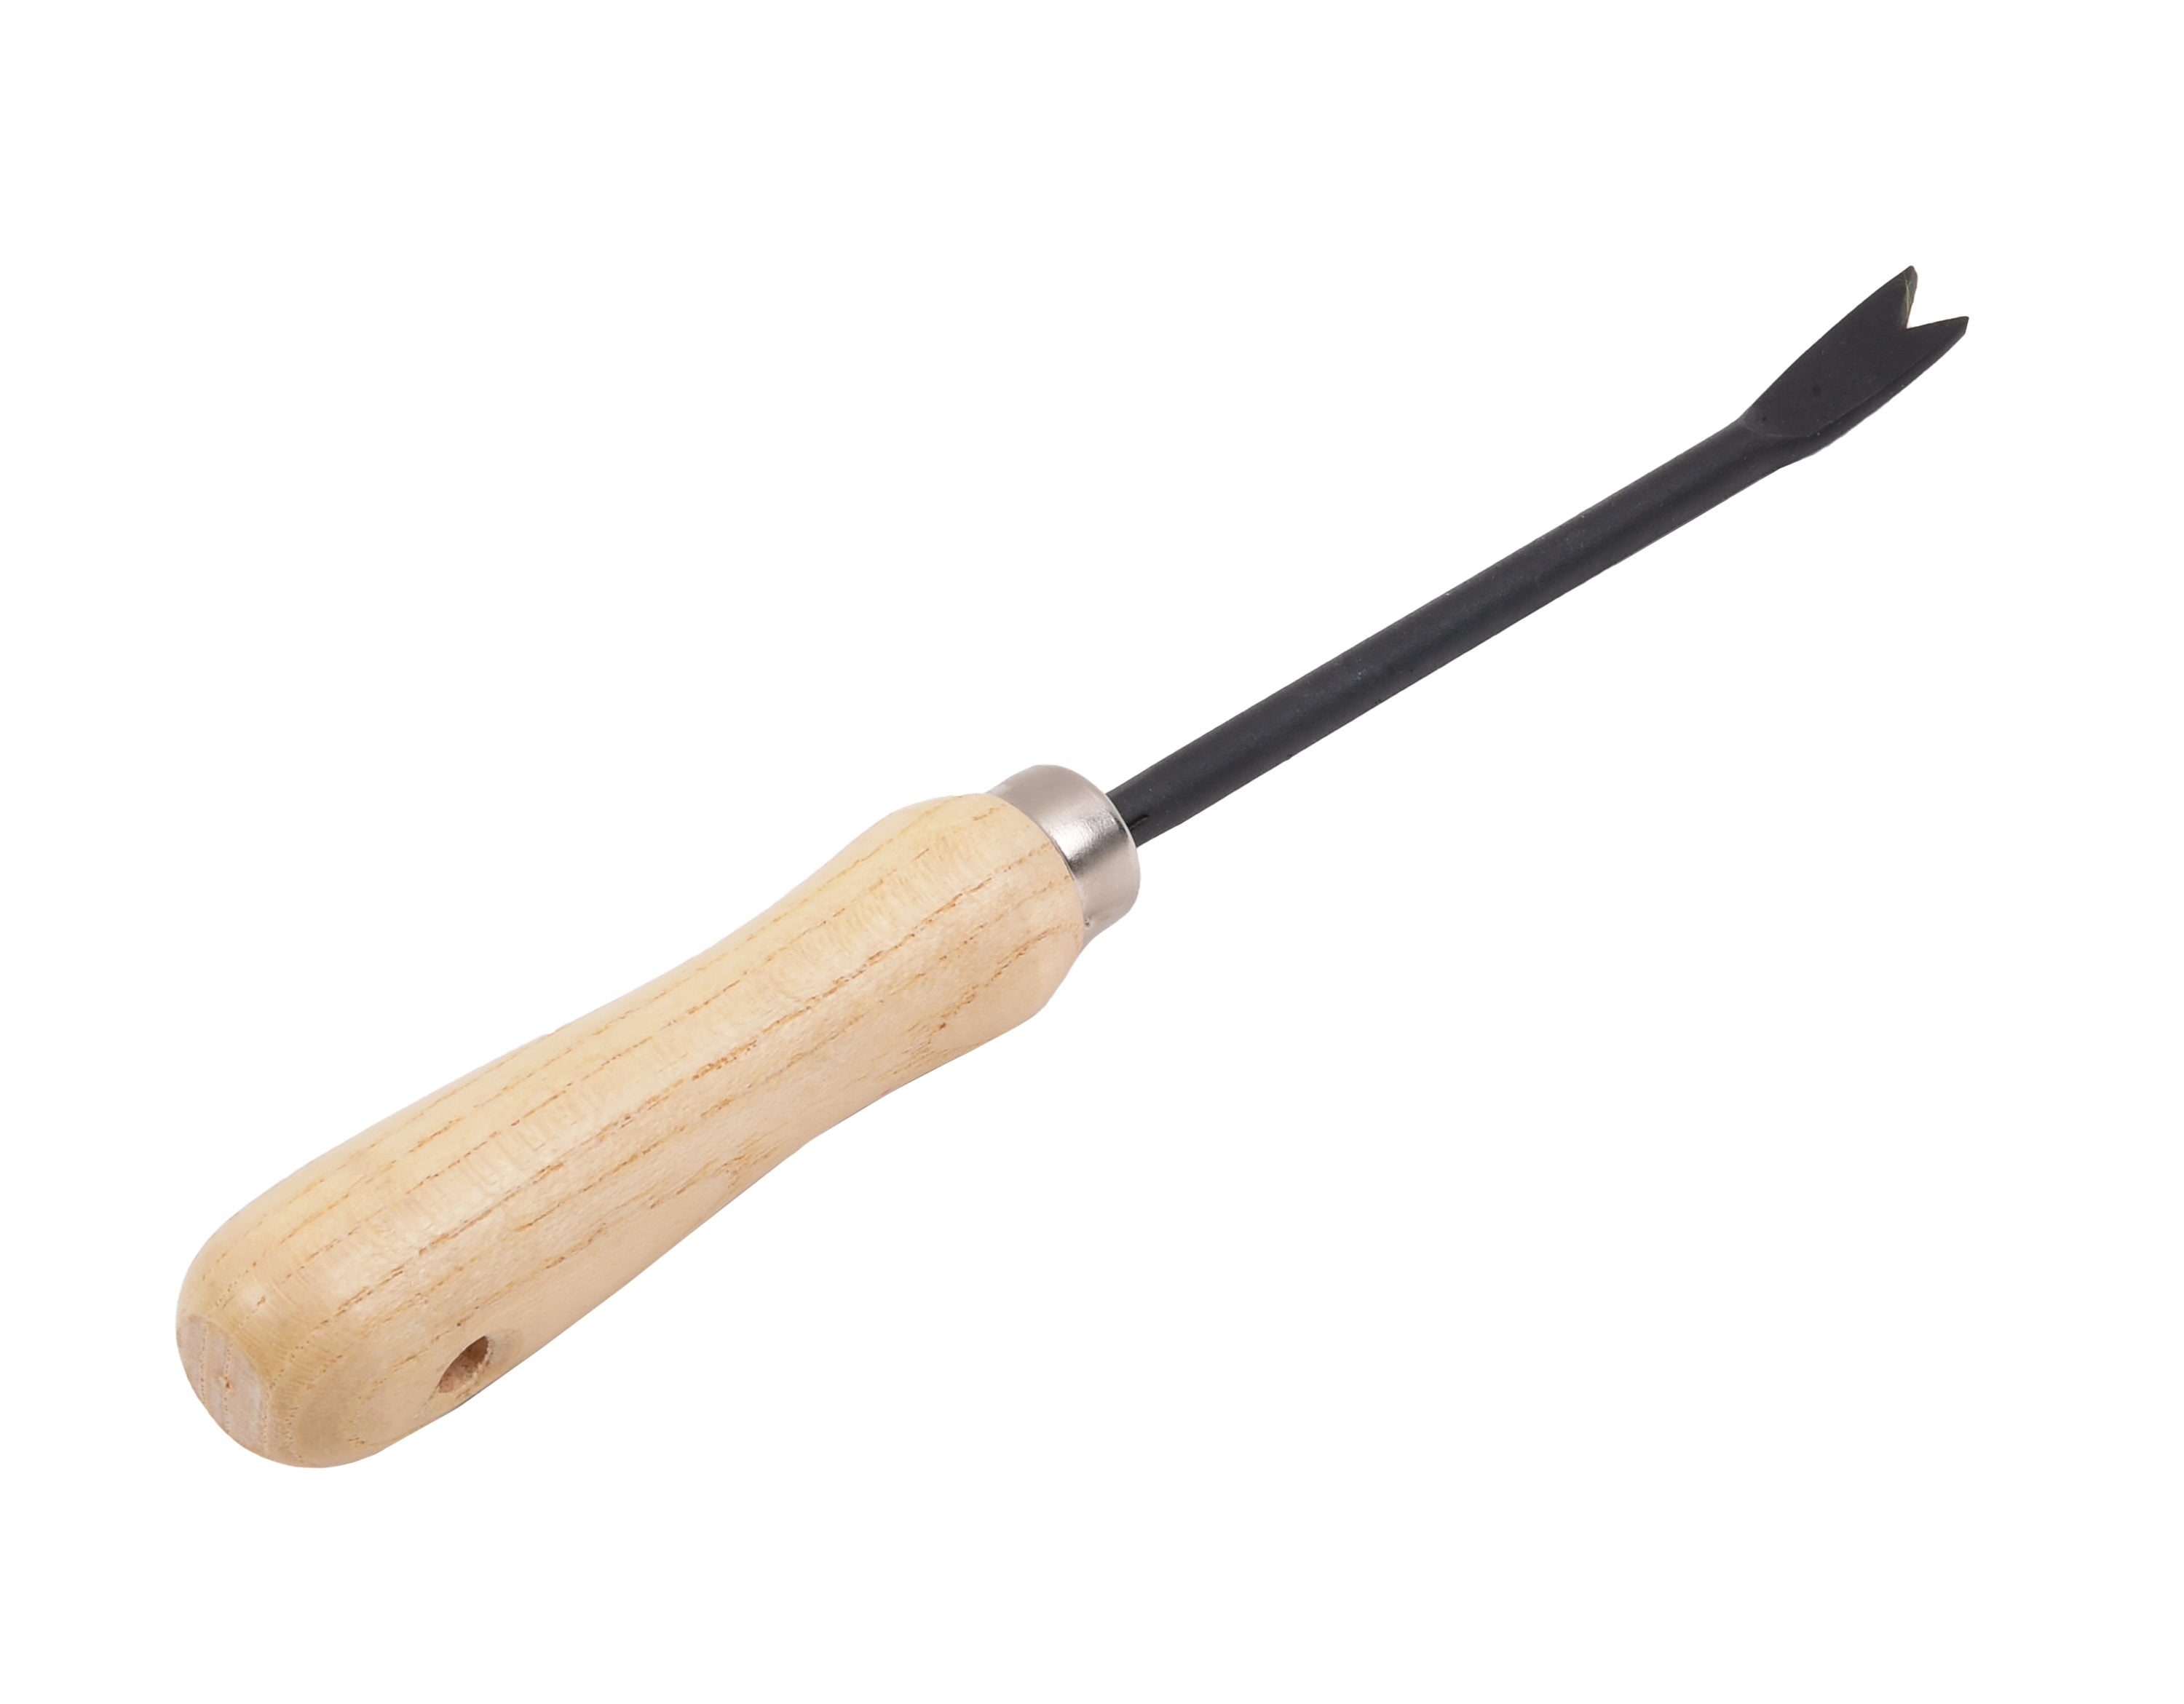 Yardsmith Hand Tool Weeder in the Weeders department at